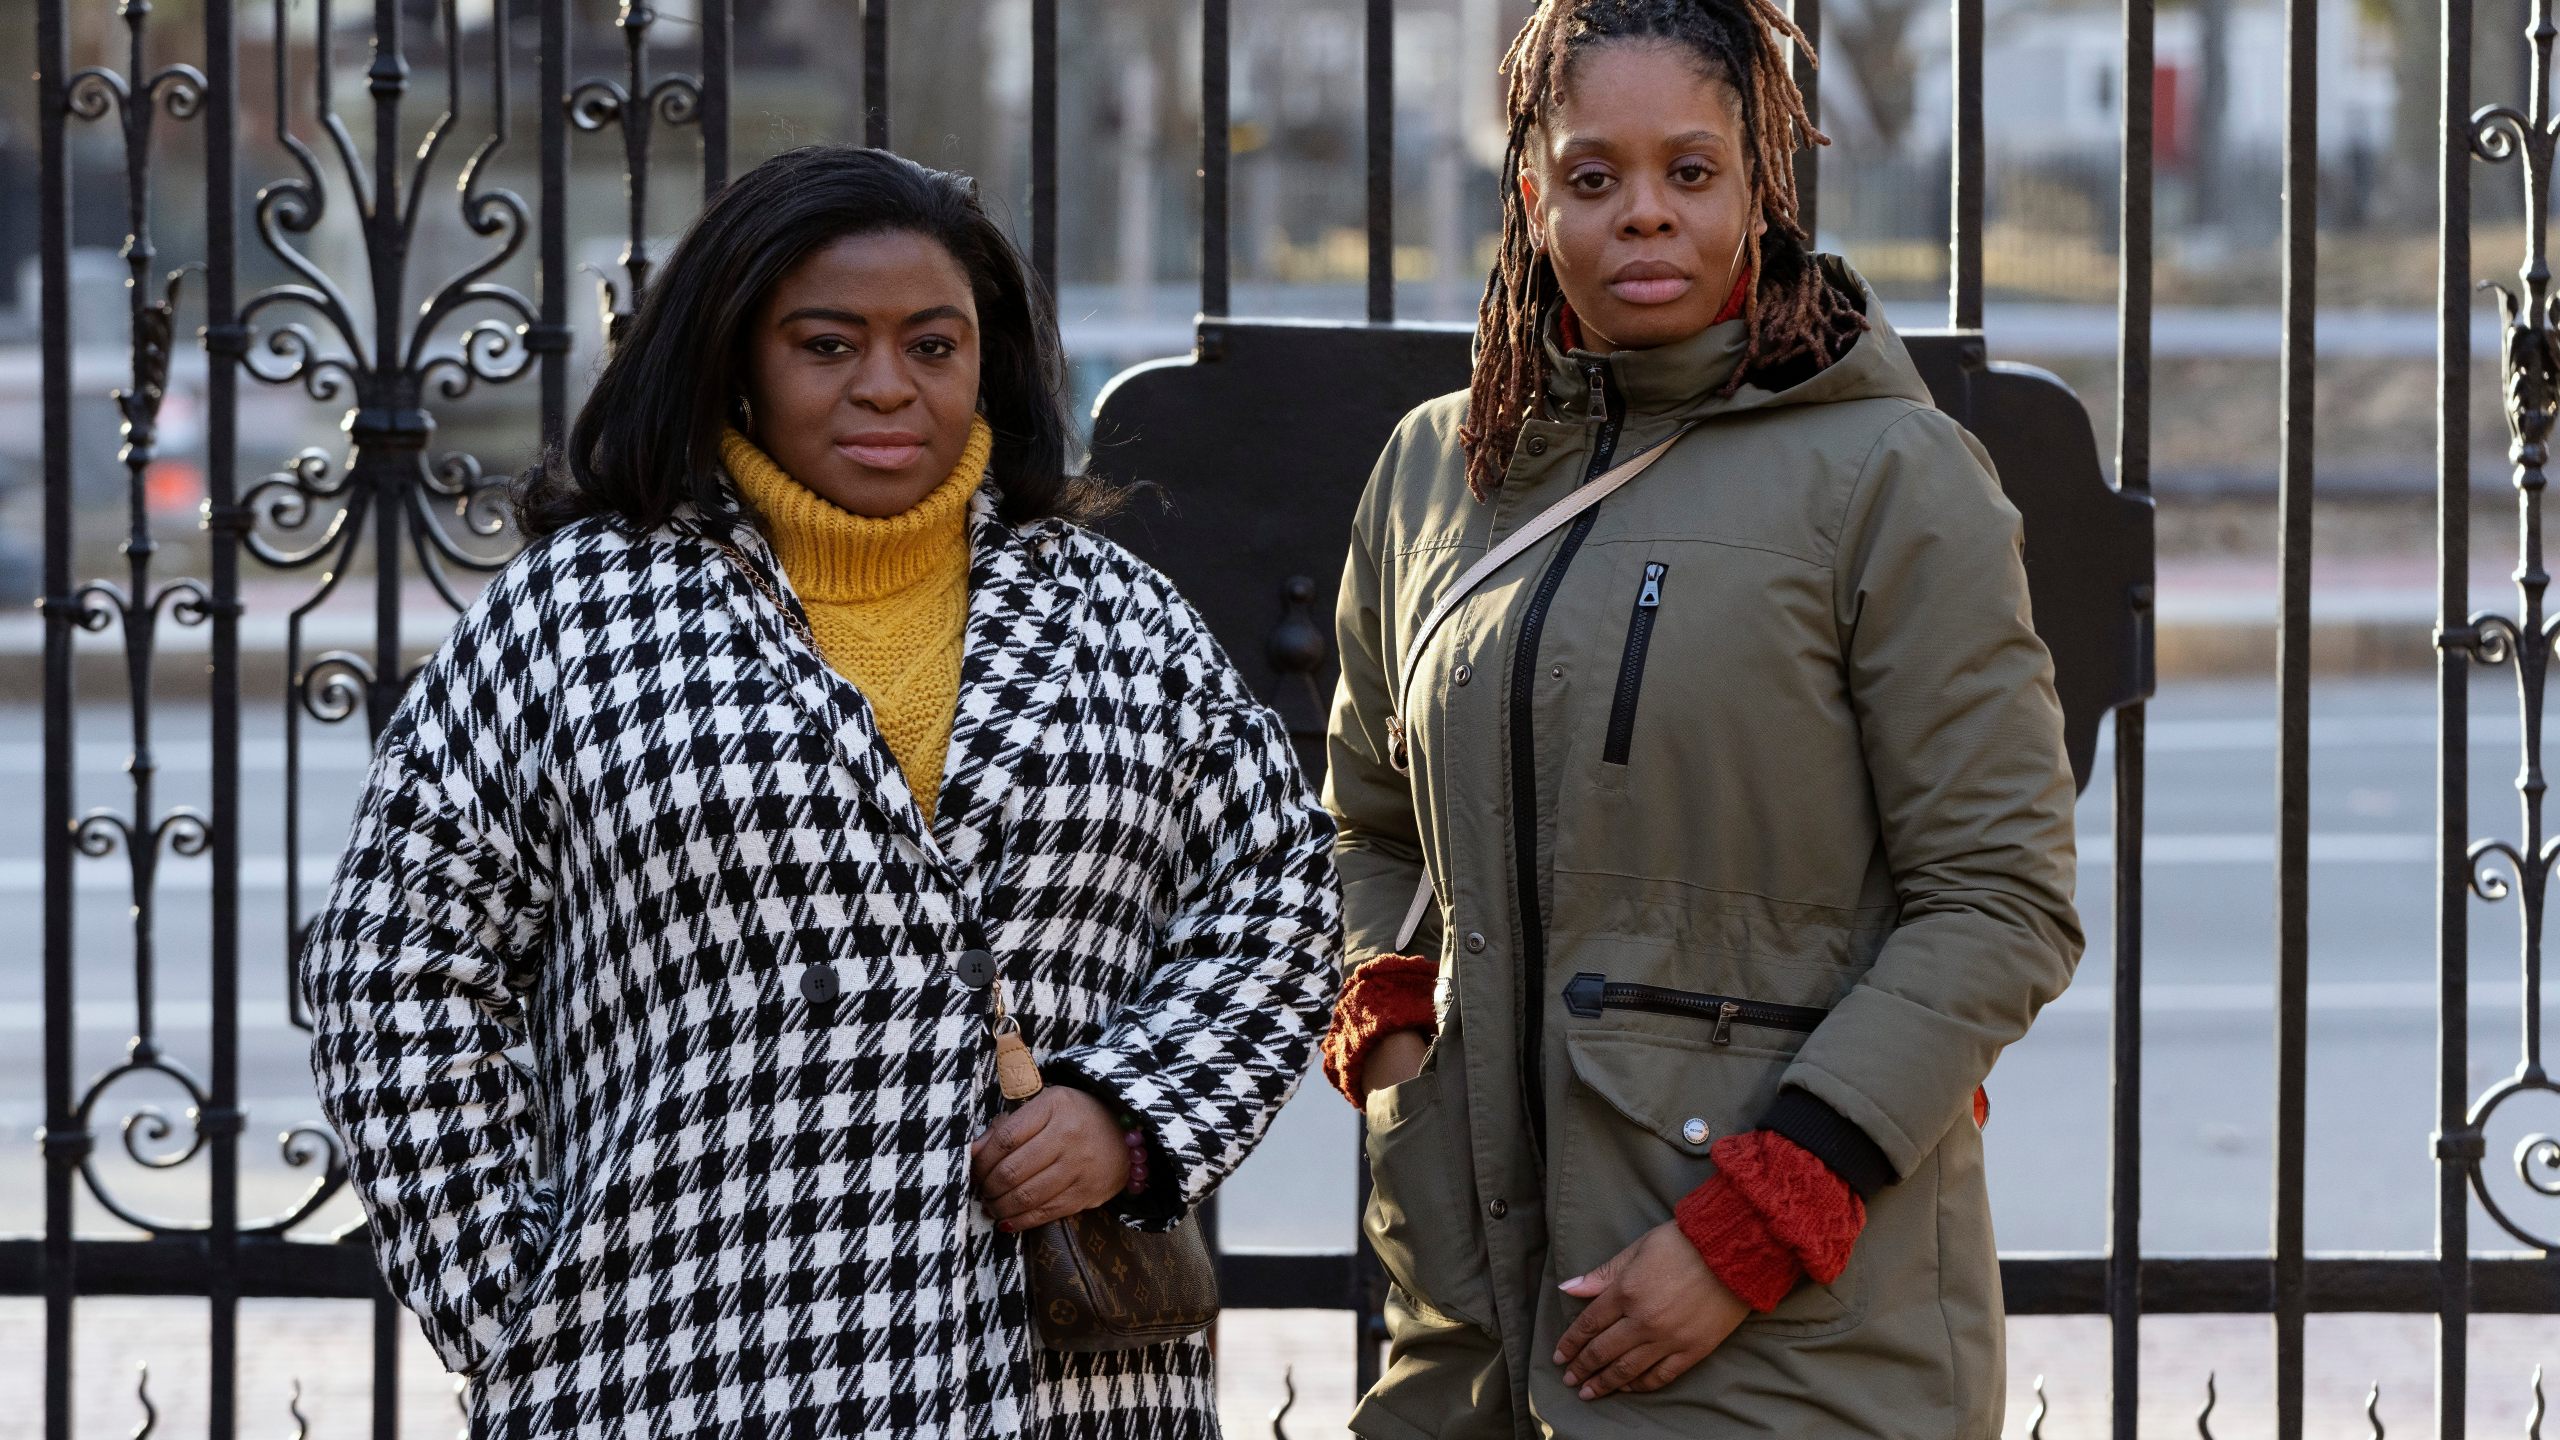 Chassity Coston, left, and Charity Wallace pose in Harvard Yard at Harvard University, Saturday, Feb. 24, 2024, in Cambridge, Mass. With attacks on diversity, equity and inclusion initiatives raging on, Black women looking to climb the work ladder are seeing a landscape that looks more hostile than ever. (AP Photo/Michael Dwyer)